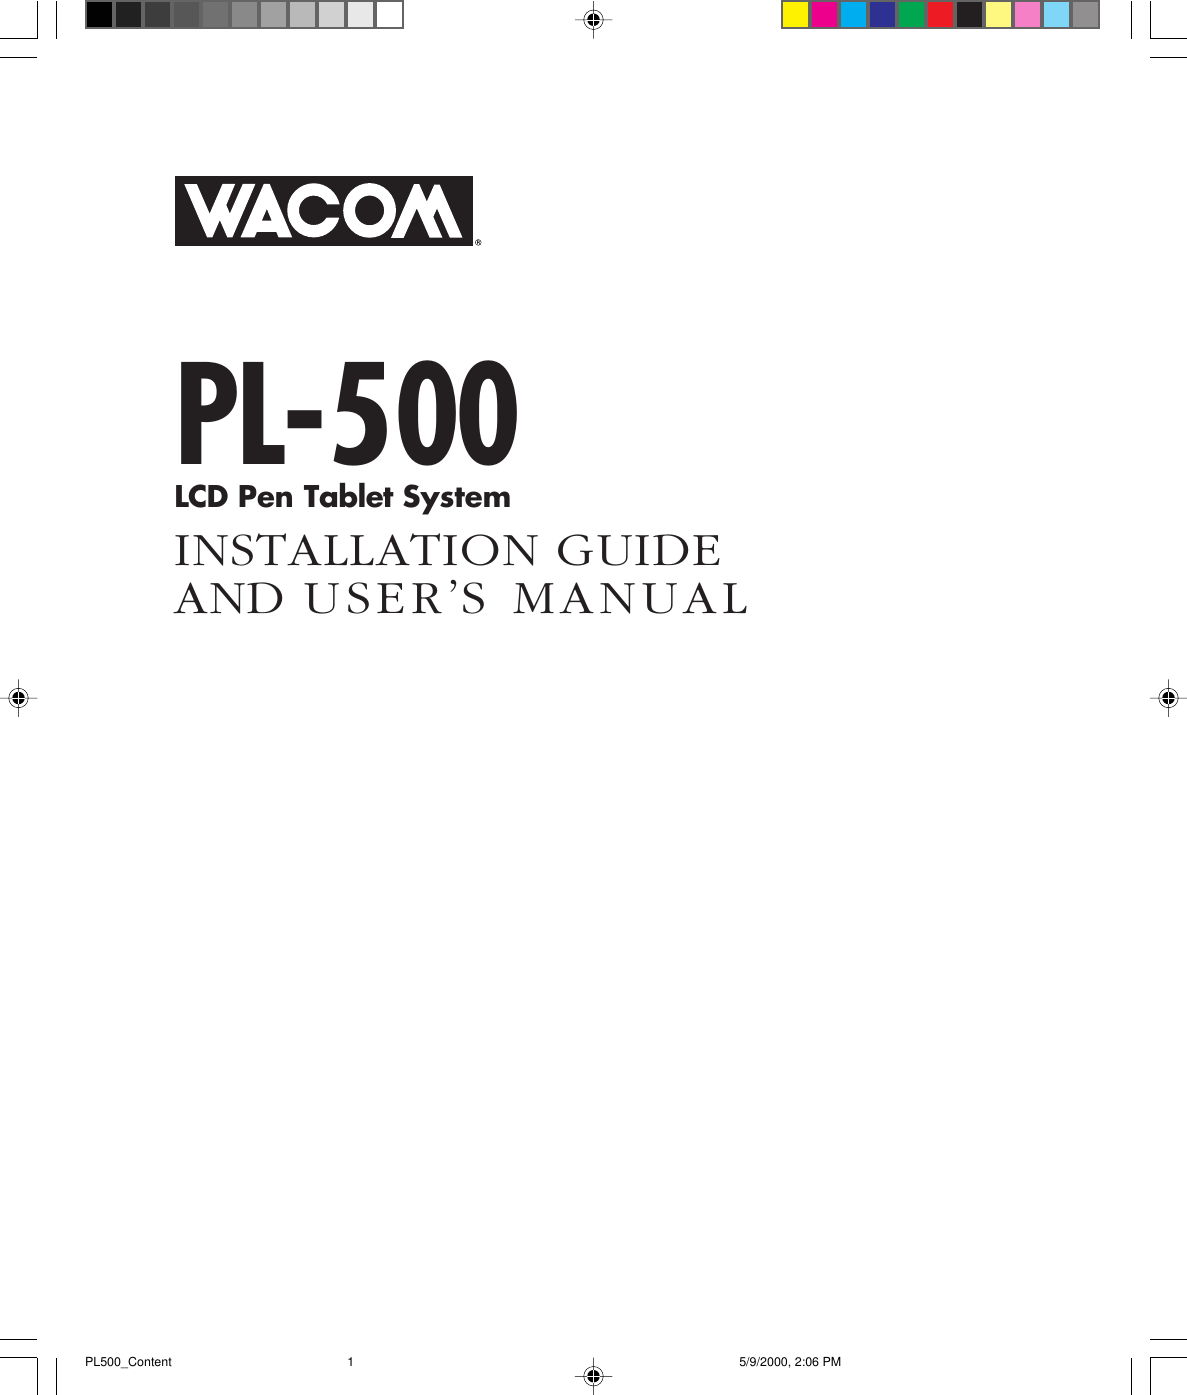 1PL-500INSTALLATION GUIDEAND USER’S MANUALLCD Pen Tablet SystemPL500_Content 5/9/2000, 2:06 PM1